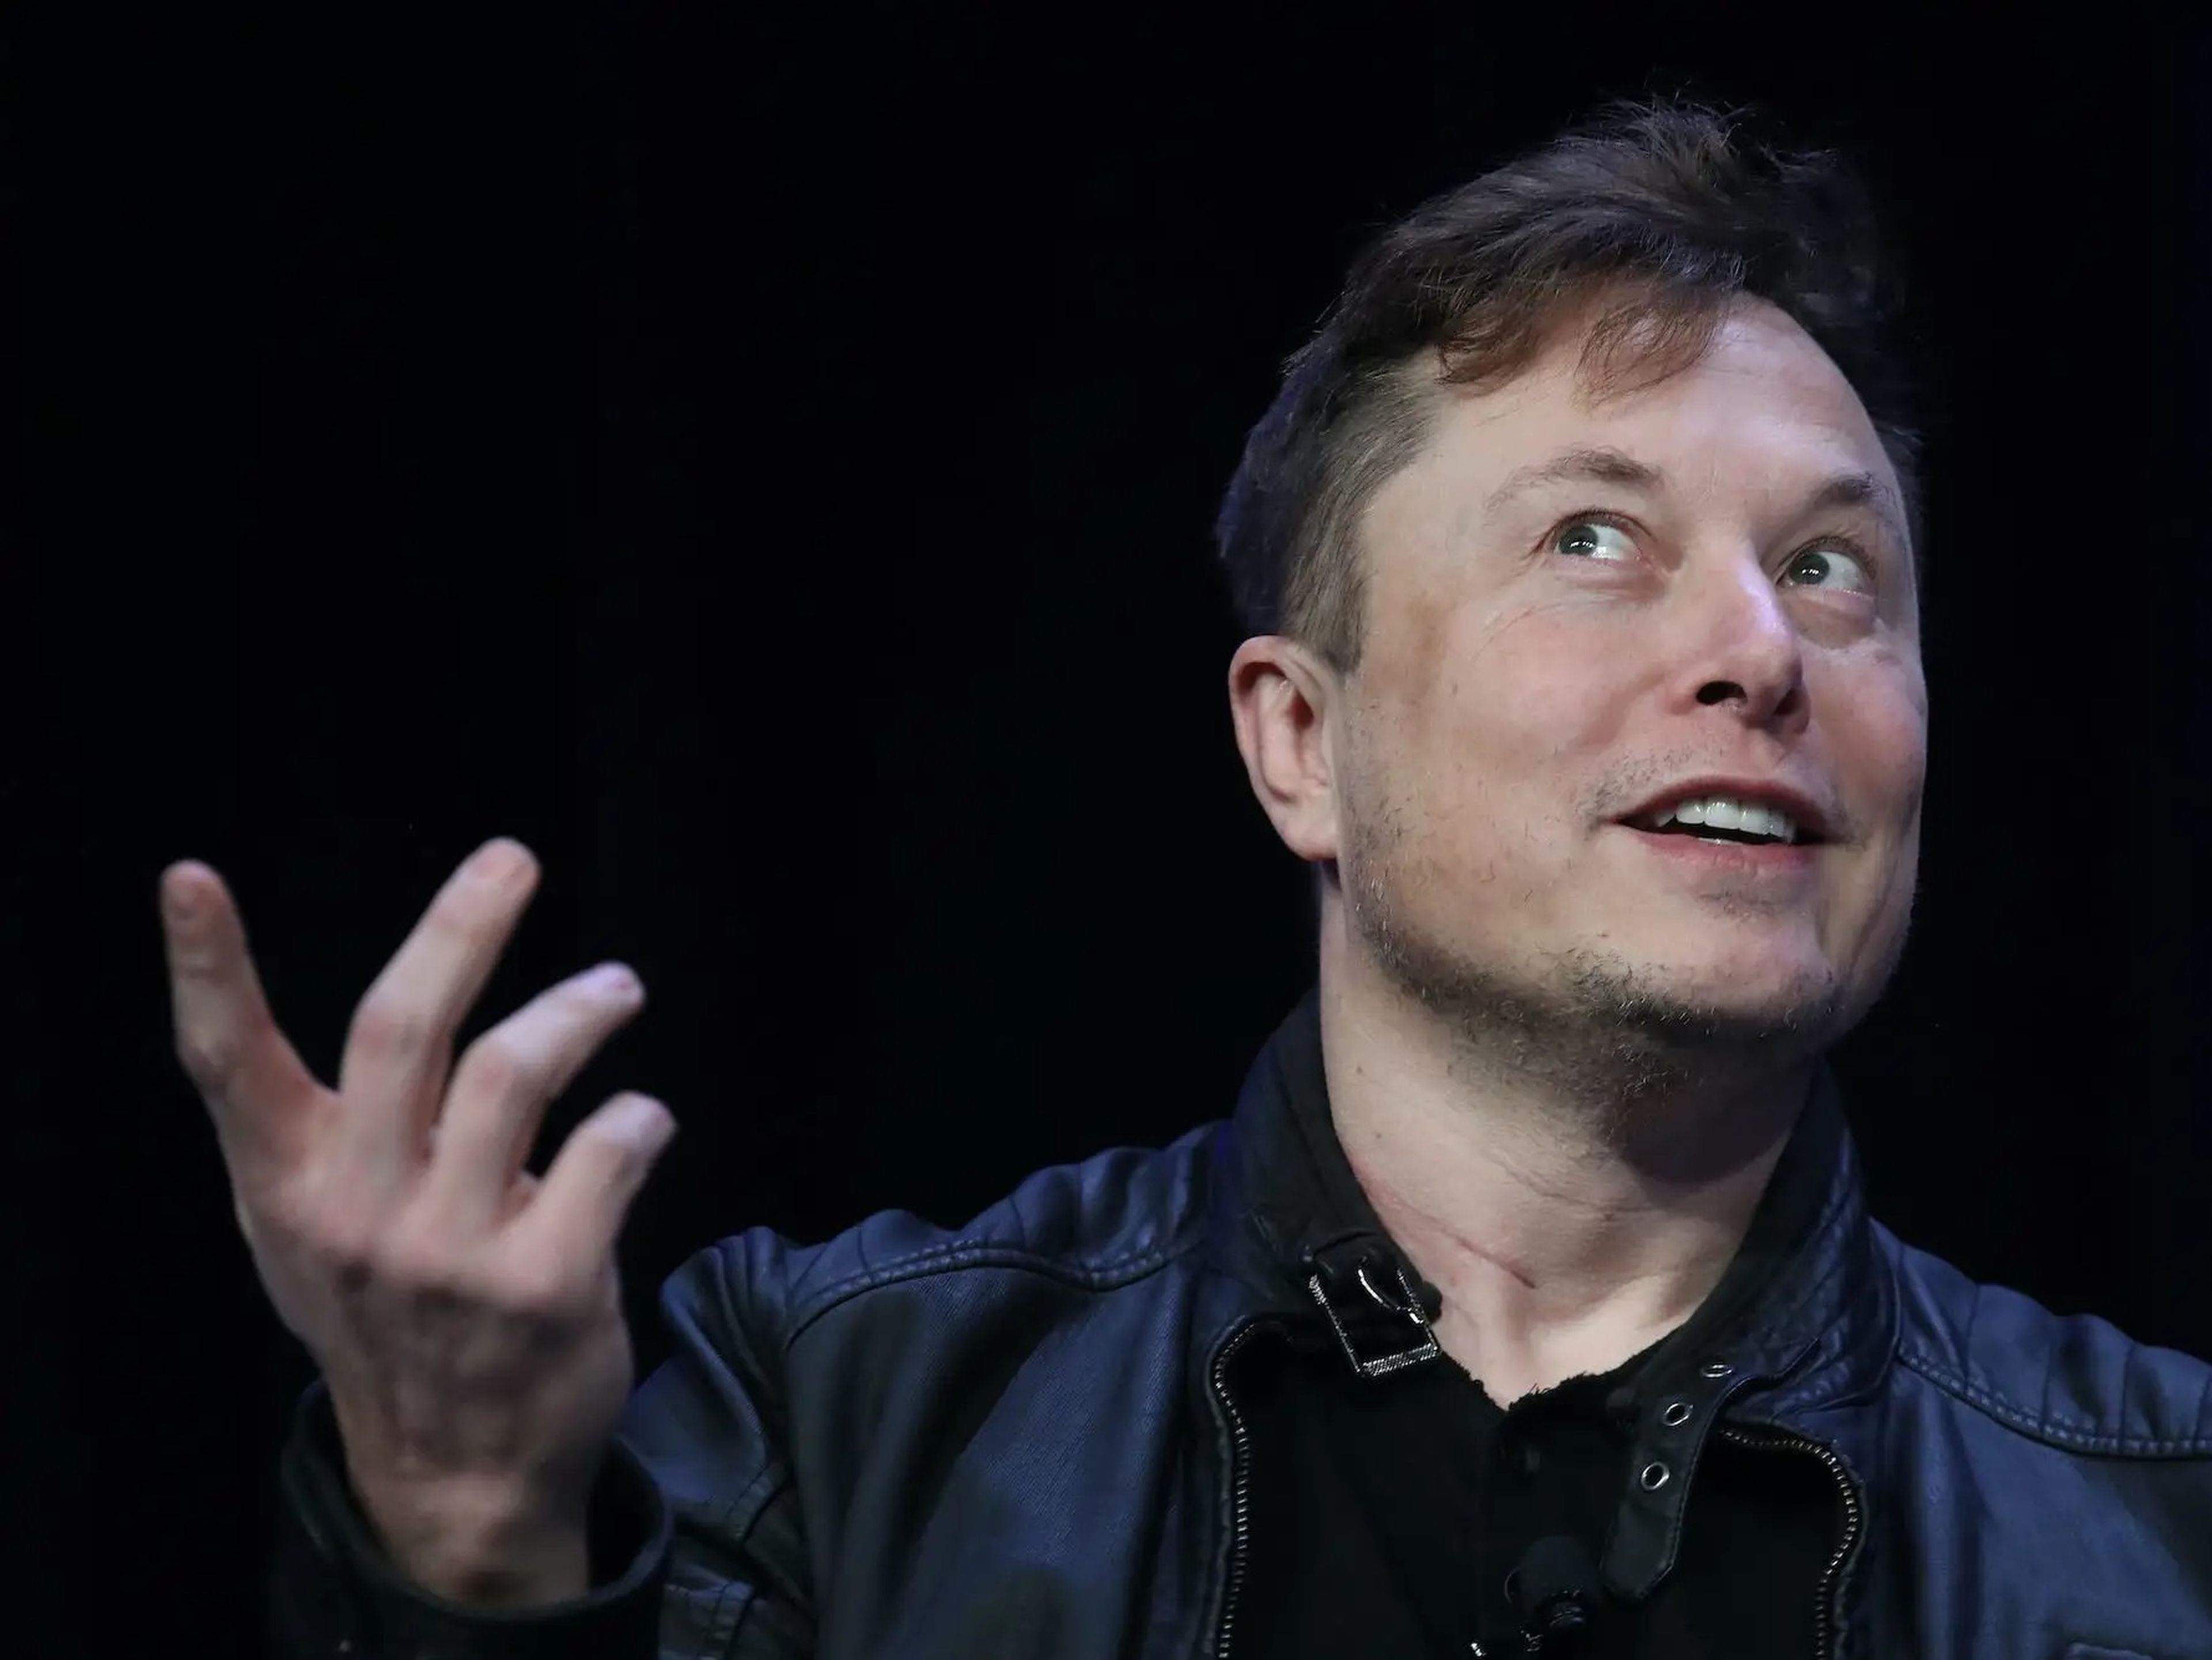 Elon Musk, founder and chief engineer of SpaceX speaks at the 2020 Satellite Conference and Exhibition March 9, 2020 in Washington, DC.